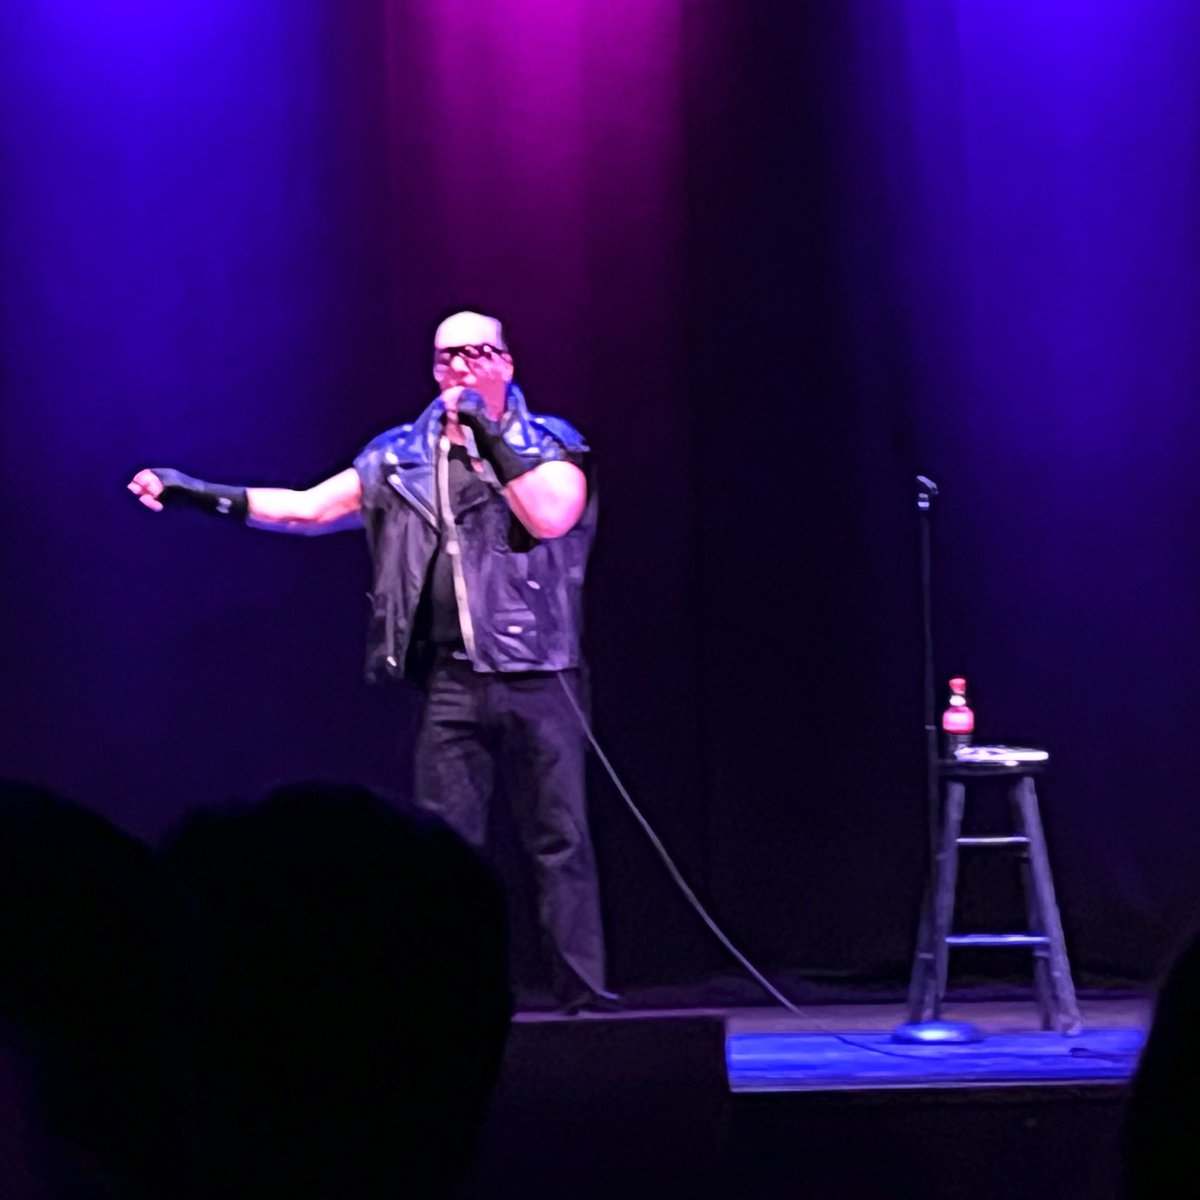 Great seeing my all time favorite comic @TheRealDiceClay last night in LA @wiltern . He killed as usual for the packed house !